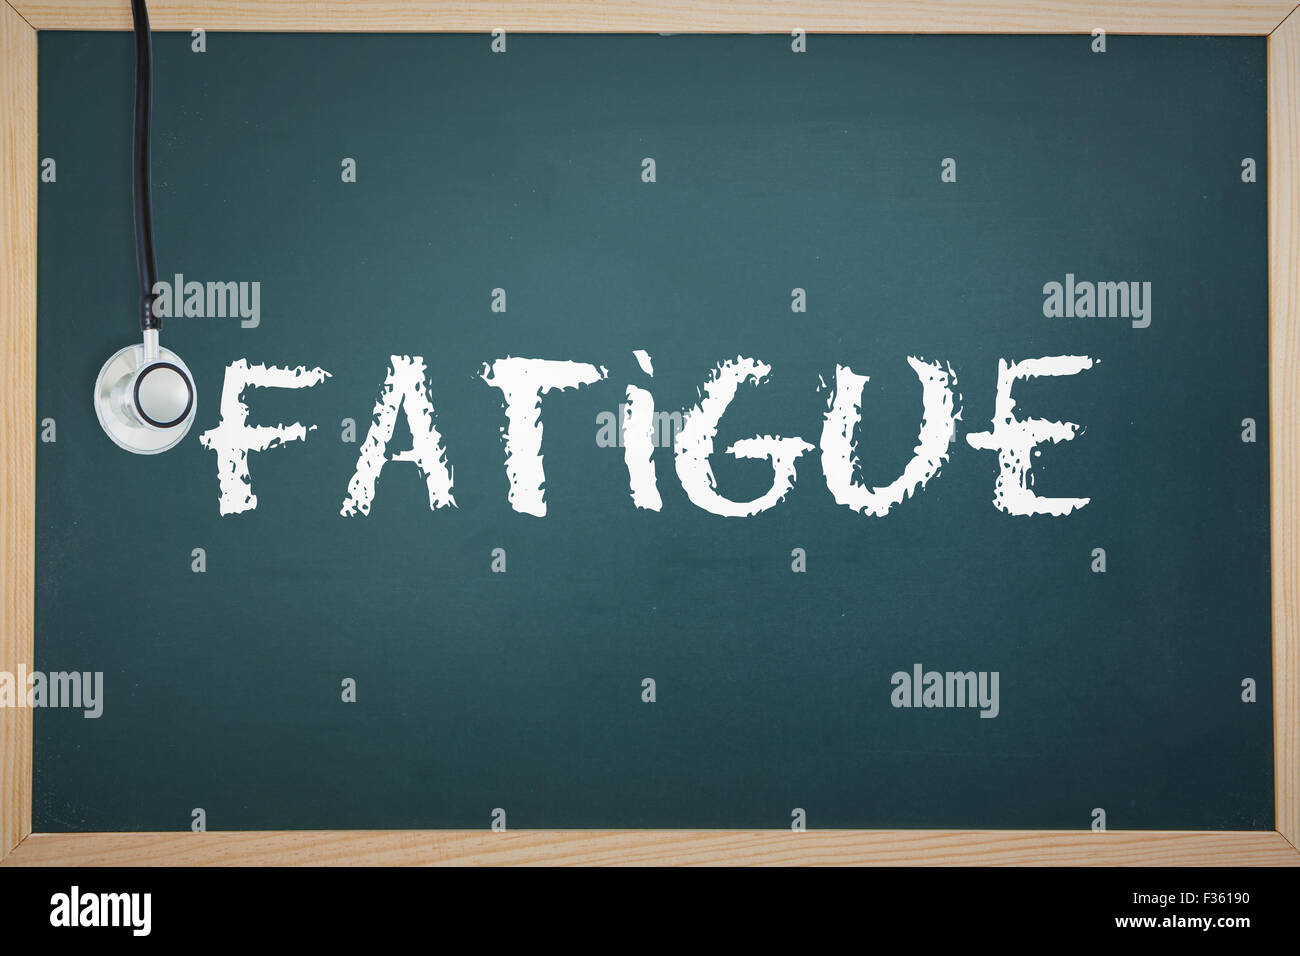 Fatigue against chalkboard Stock Photo